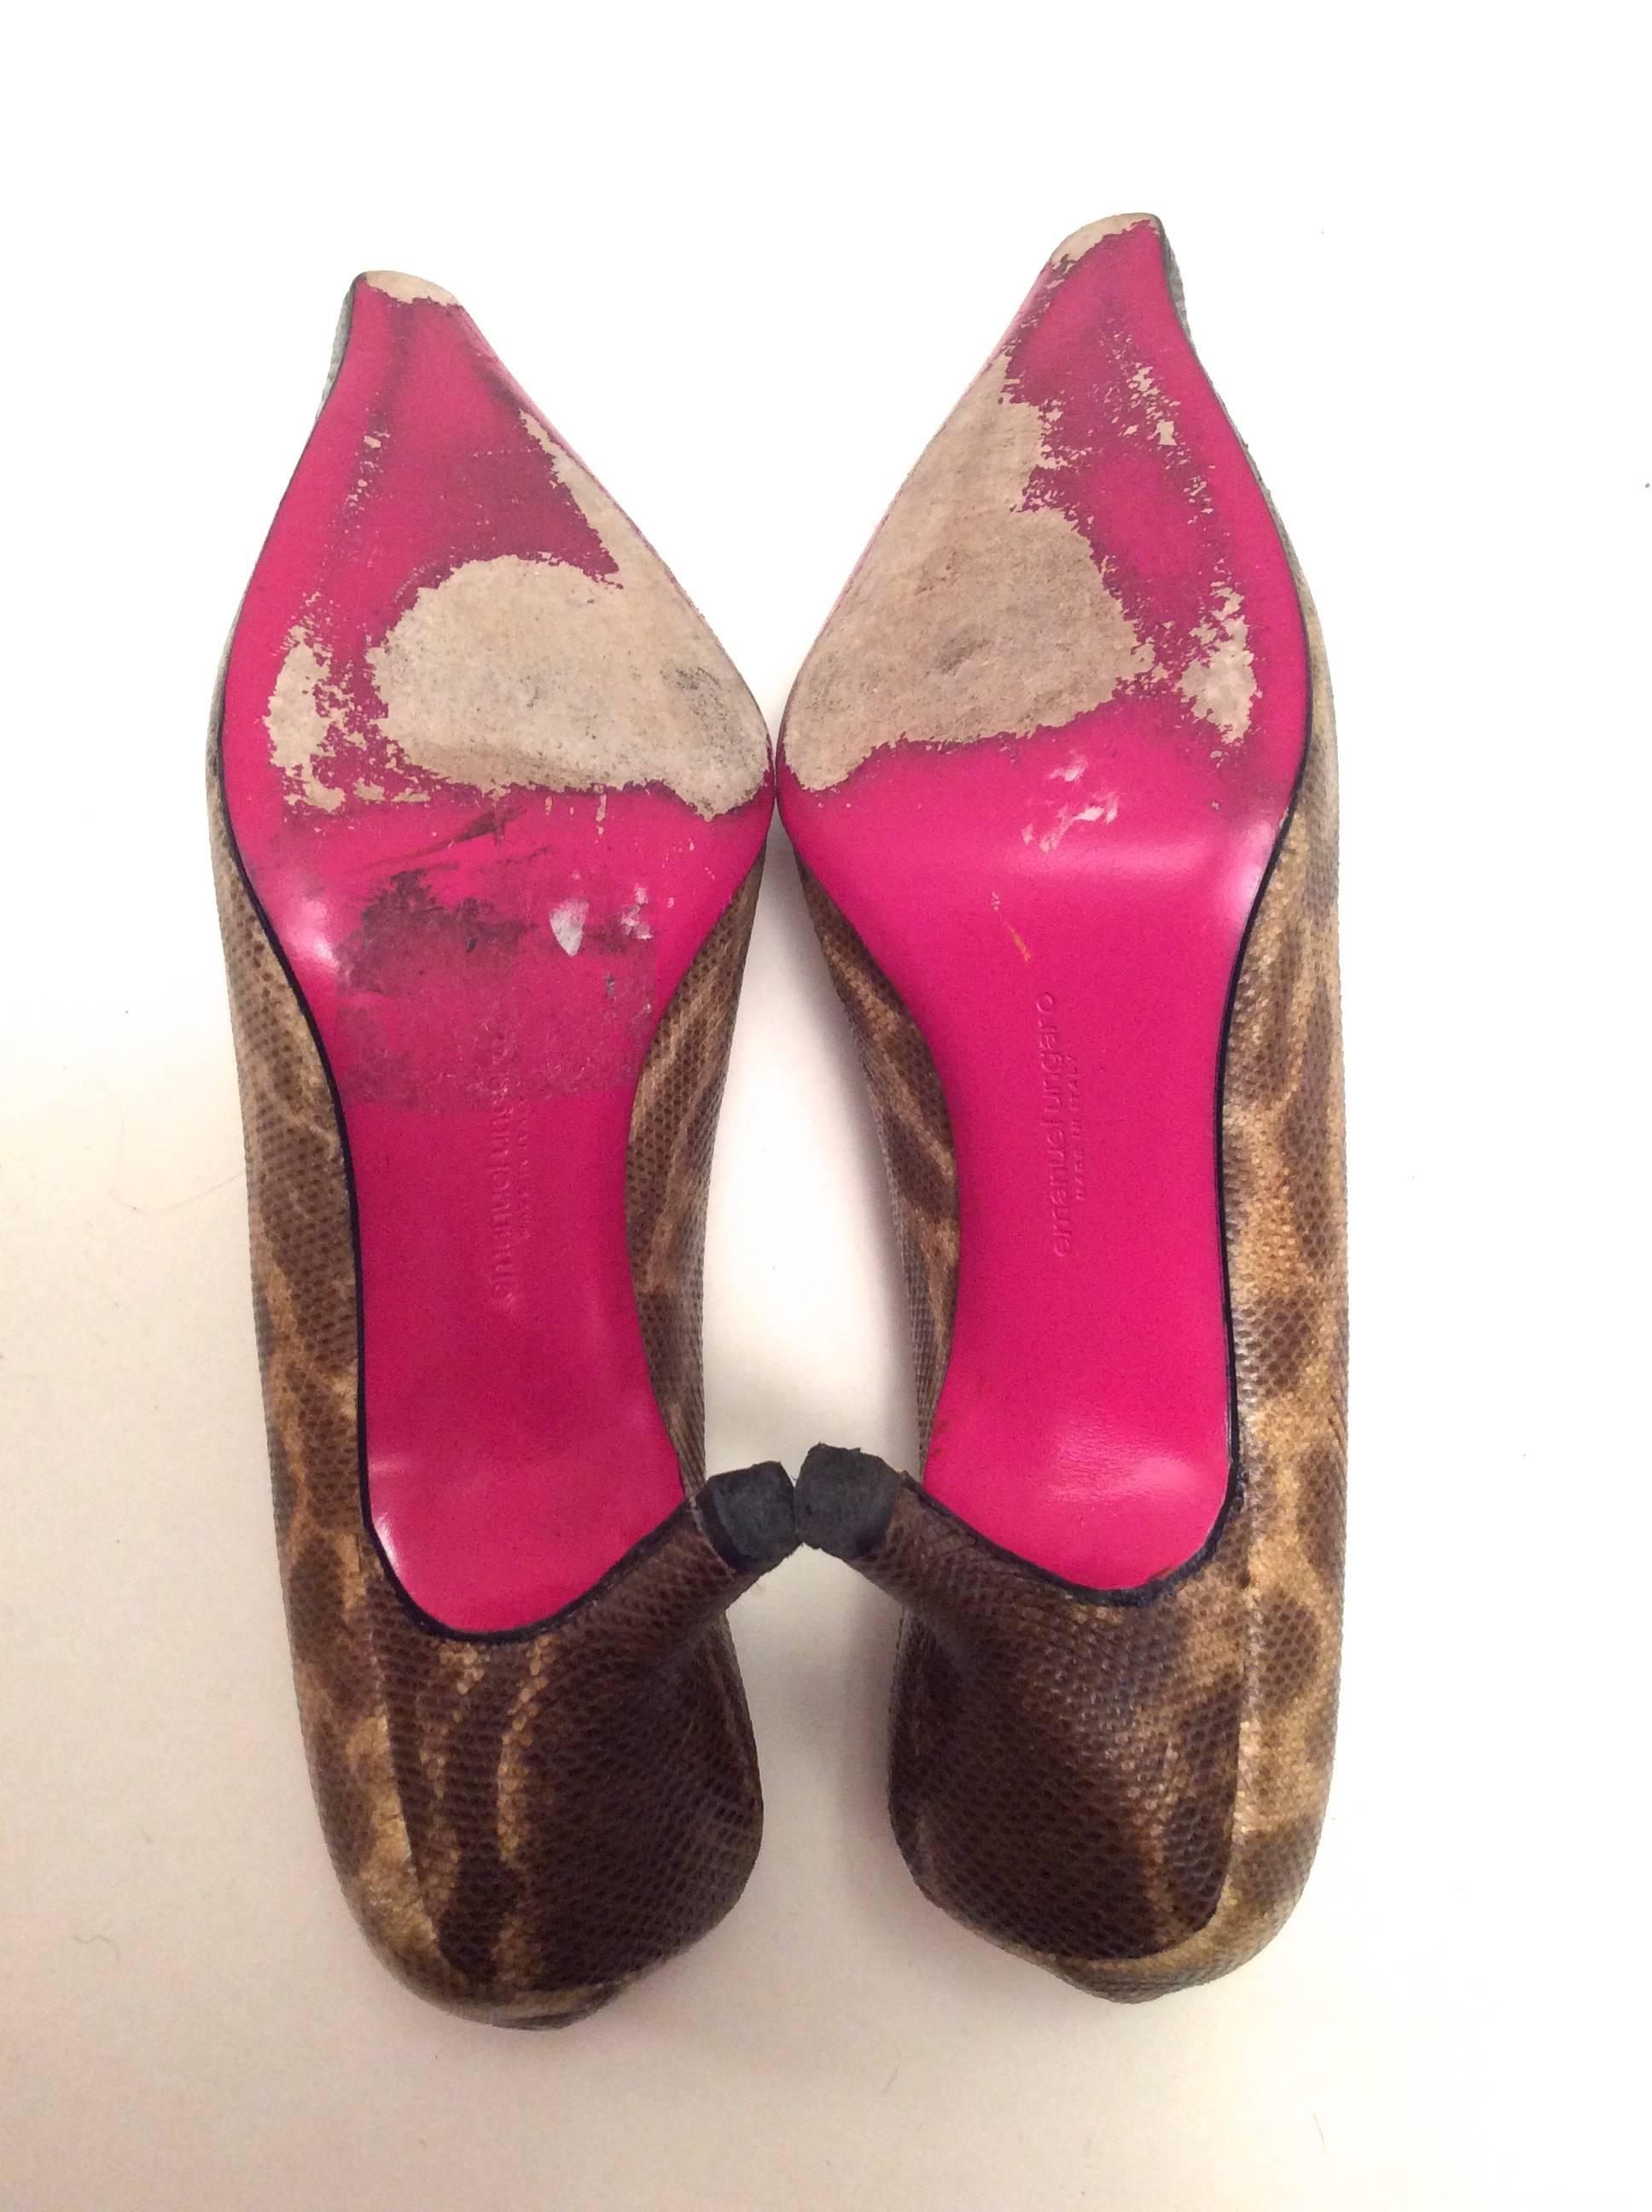 This pair of Emanuel Ungaro Paris shoes is from the 1980's and is in excellent condition. They have only been worn a few times. They are a size 7 and fit like a 7. They run a tad small. The sole has a minor bit of wear. The exterior of the shoe is a